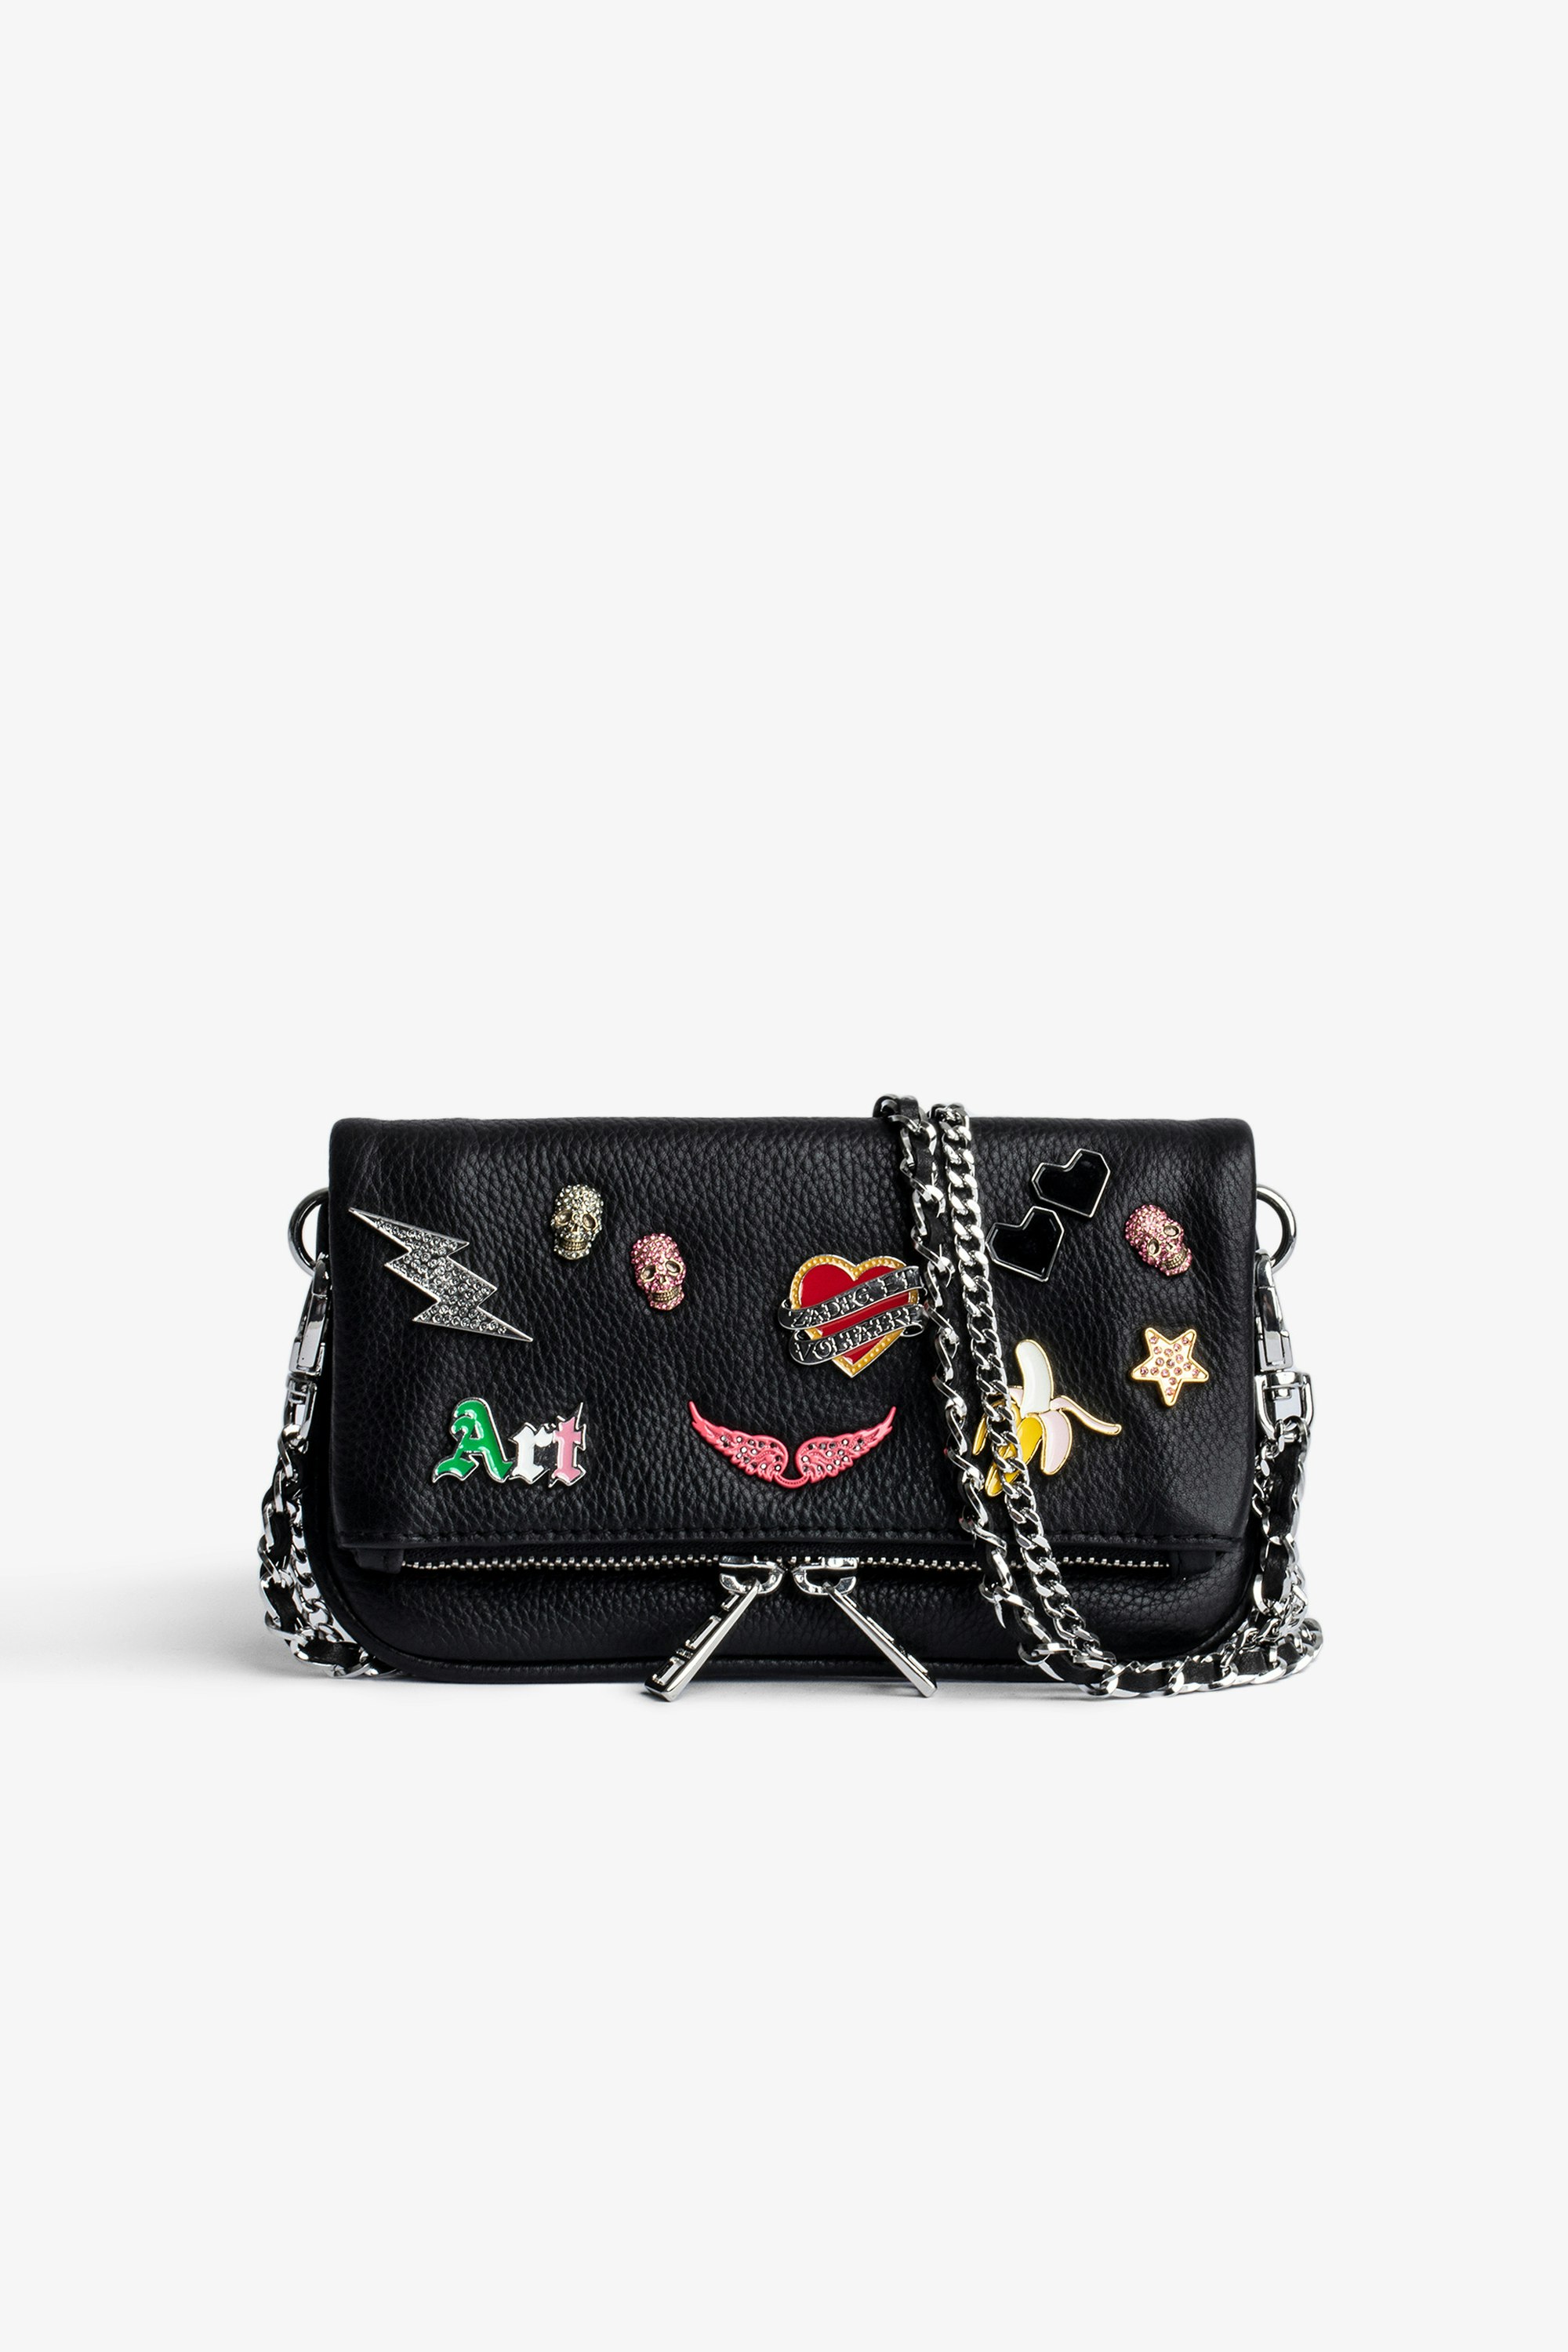 Rock Nano クラッチバッグ Women’s Rock Nano clutch in black grained leather with badges